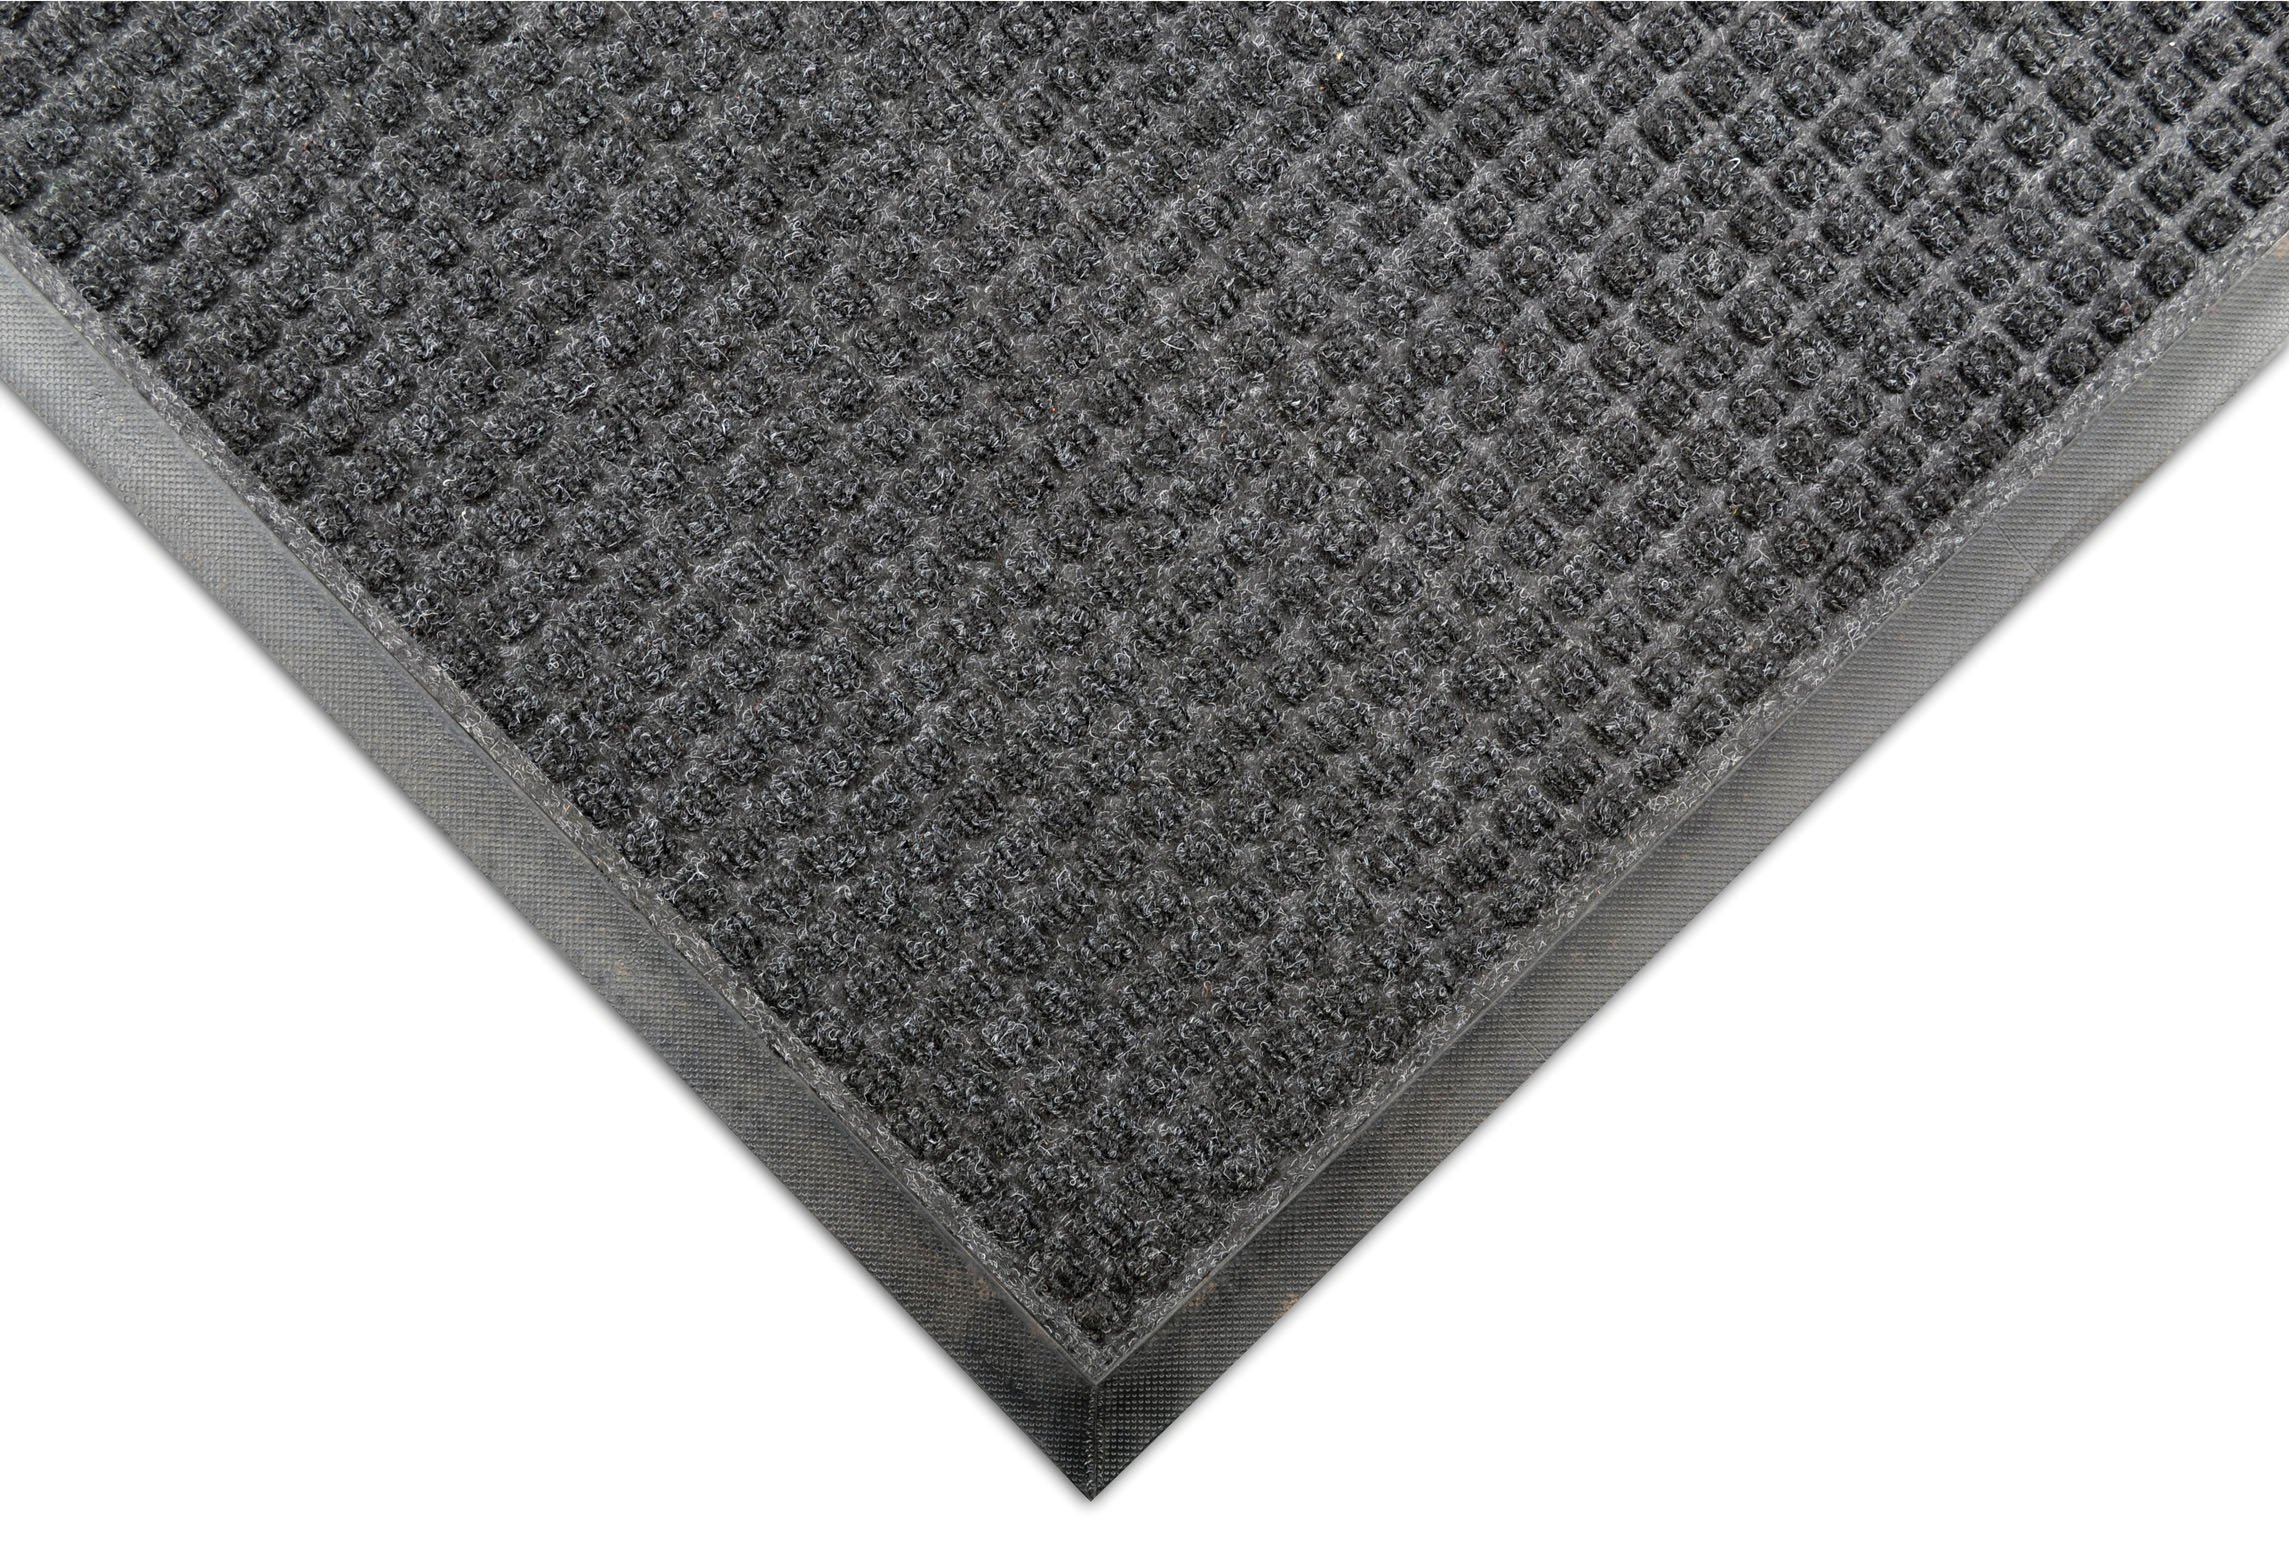 Notrax - 166S0046Ch Notrax 166 Guzzler Rubber-Backed Entrance Mat, For Home Or Office 4 X 6 4Ft.X6Ft